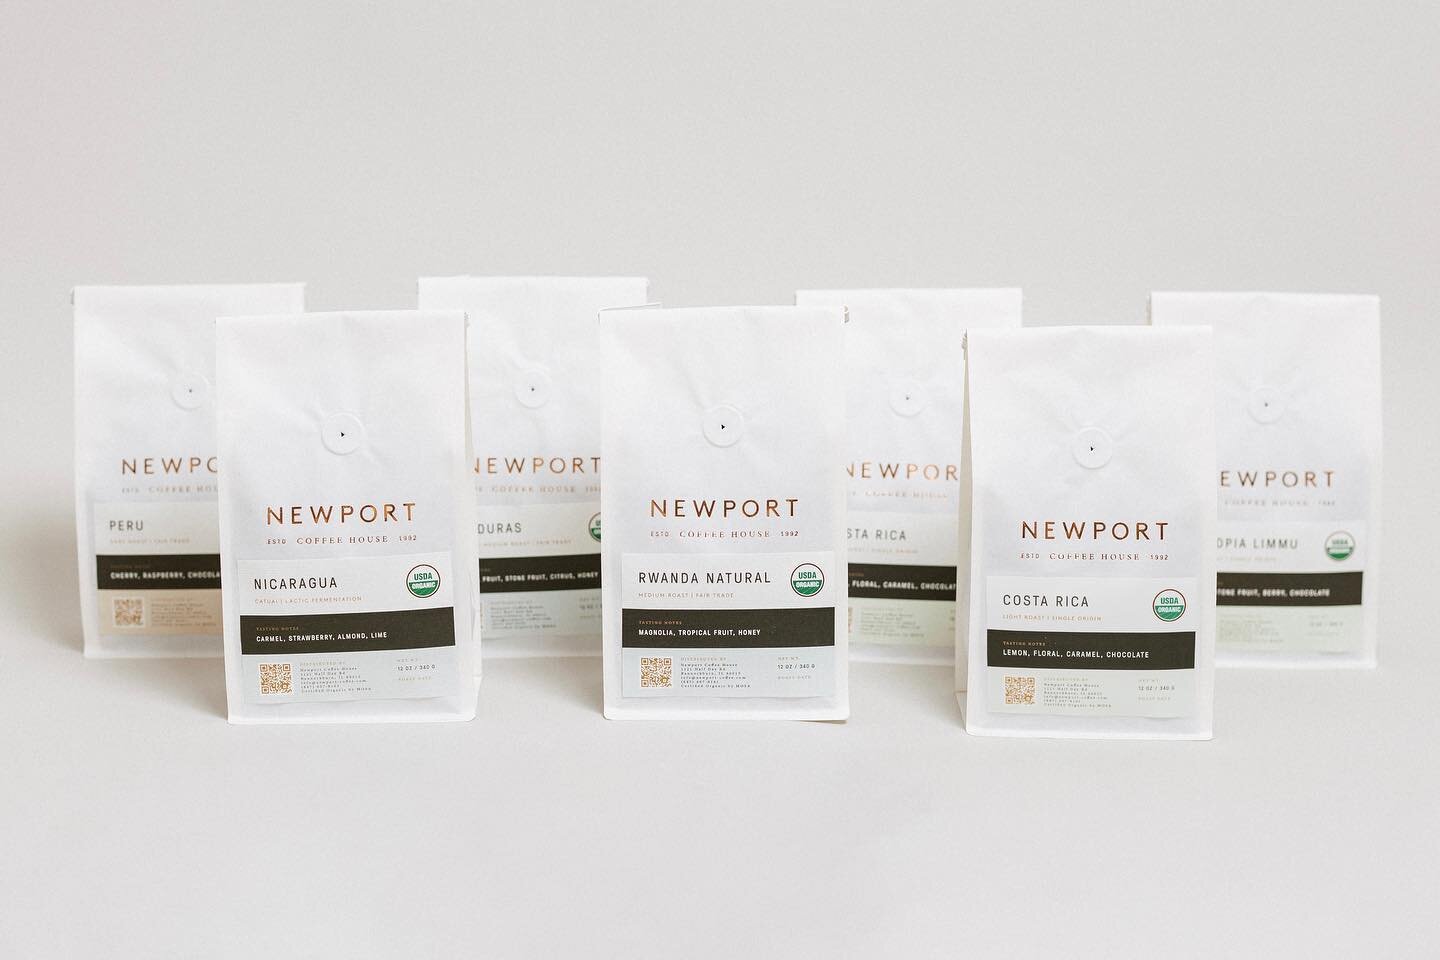 Did you know you can get our USDA Certified Organic, small batch coffee delivered right to your doorstep? Our bi-weekly coffee subscriptions allow you to customize your roast type, bag quantity, and grind preference so you can enjoy the best that New